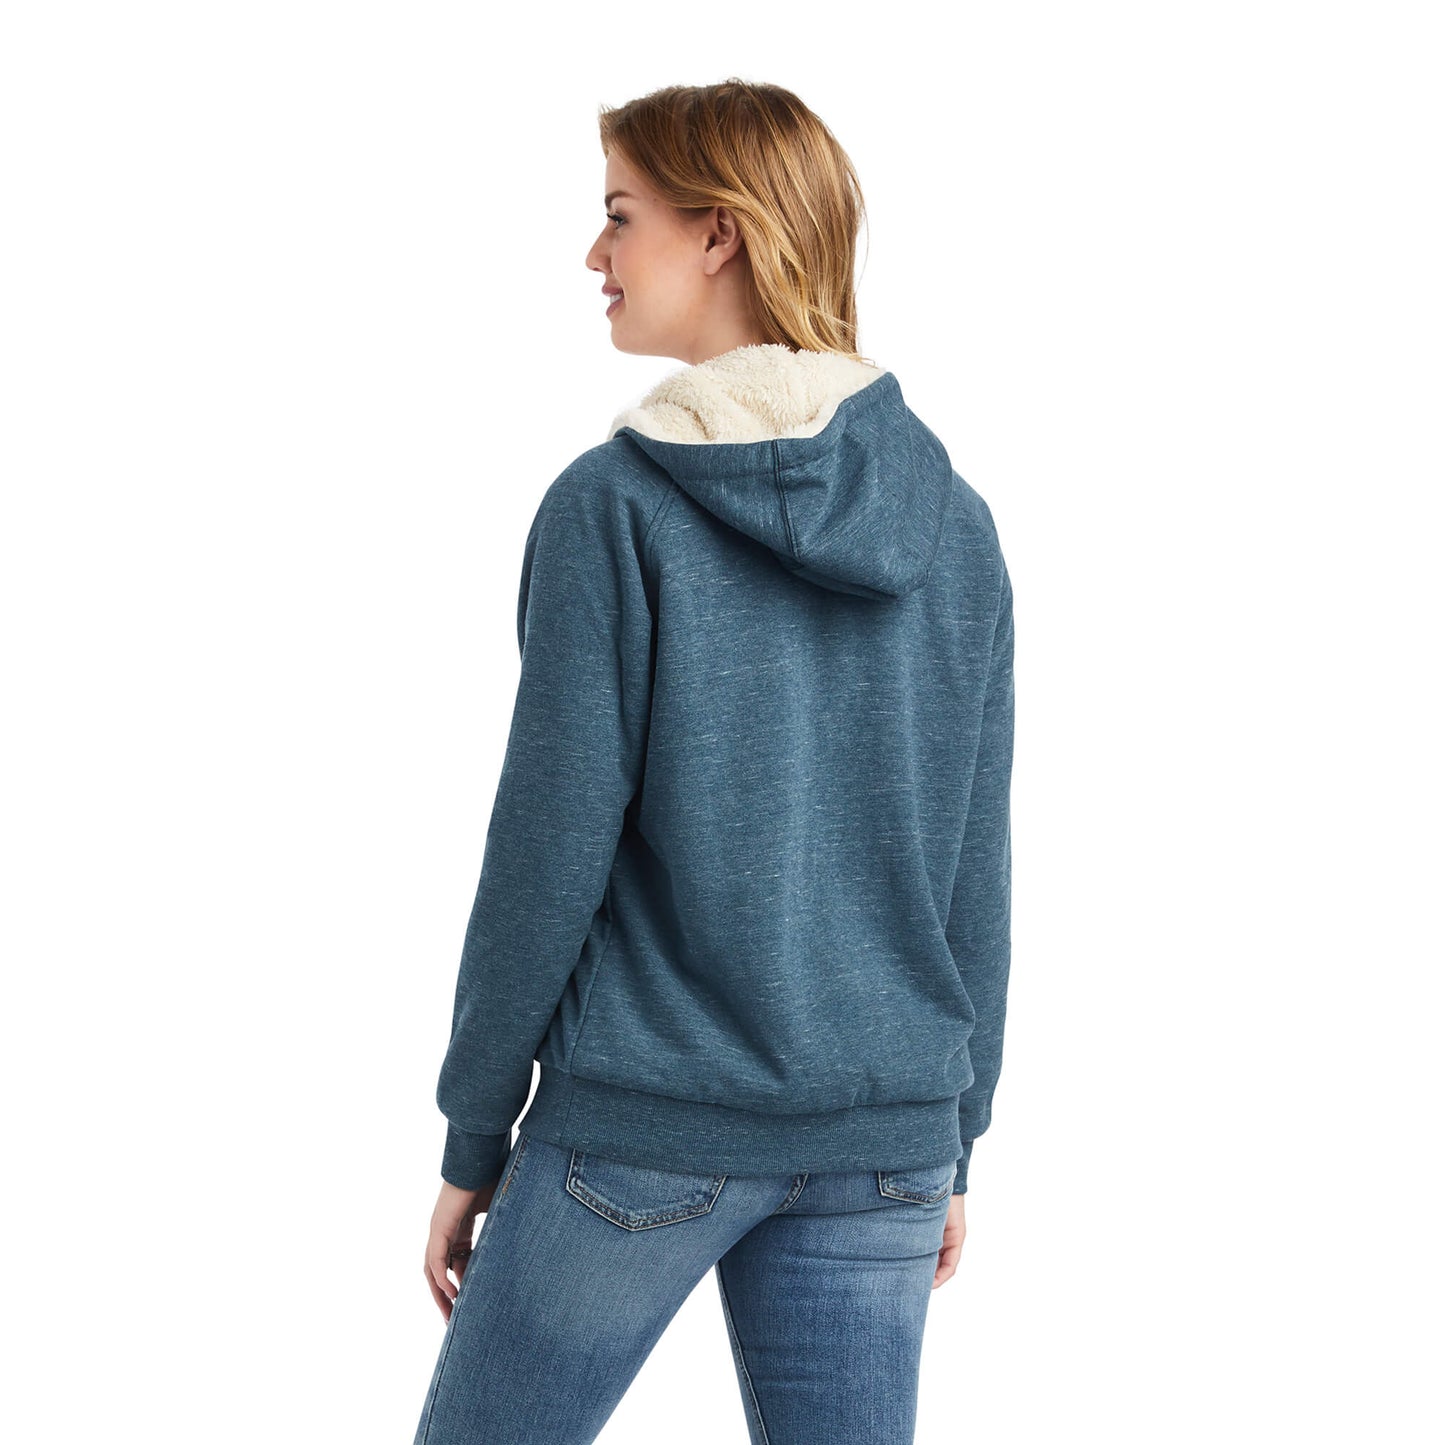 Ariat® Women's REAL Sherpa Lined Zip Front Hooded Sweater